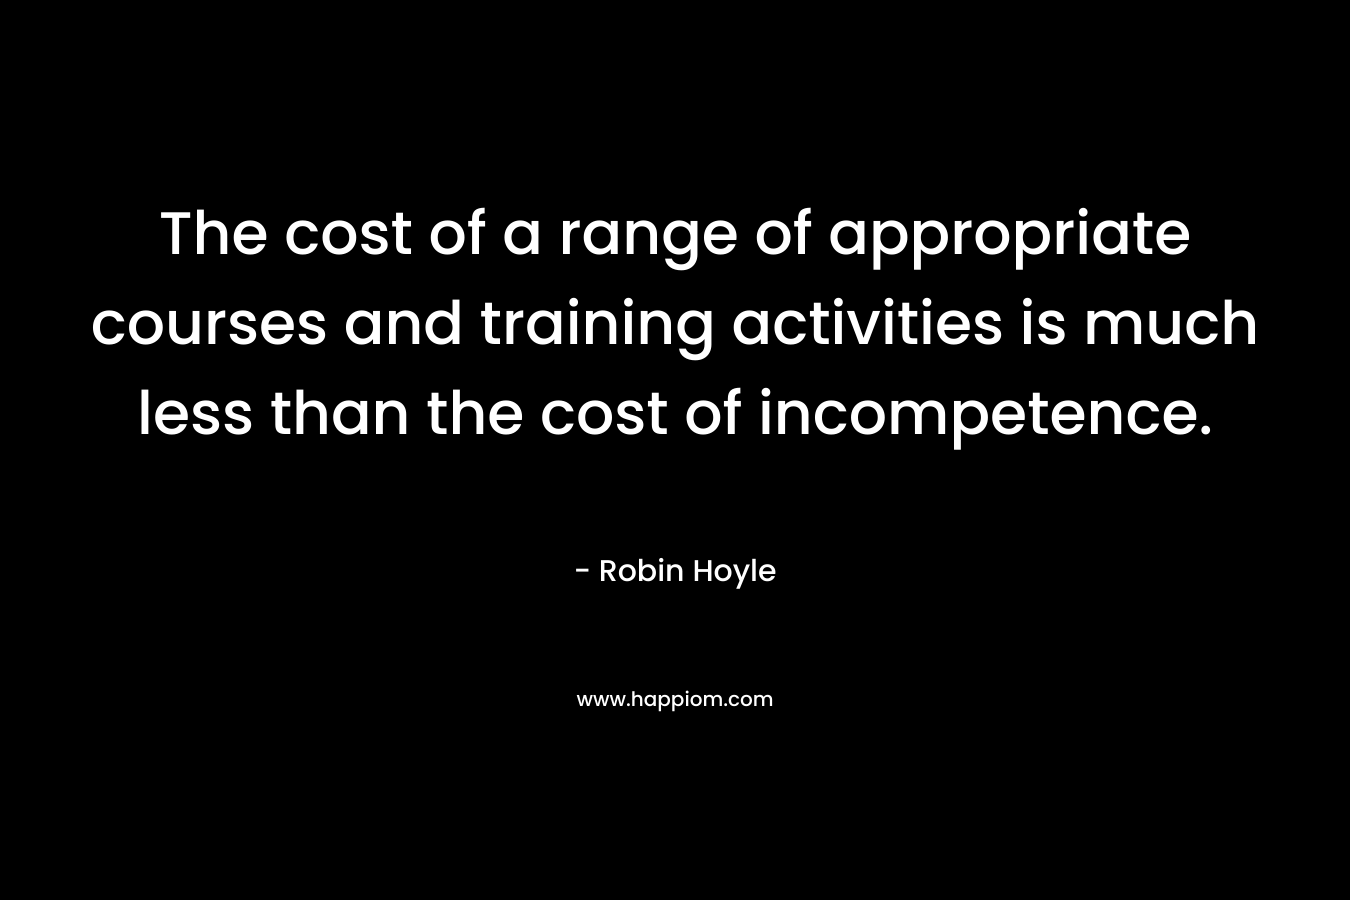 The cost of a range of appropriate courses and training activities is much less than the cost of incompetence. – Robin Hoyle